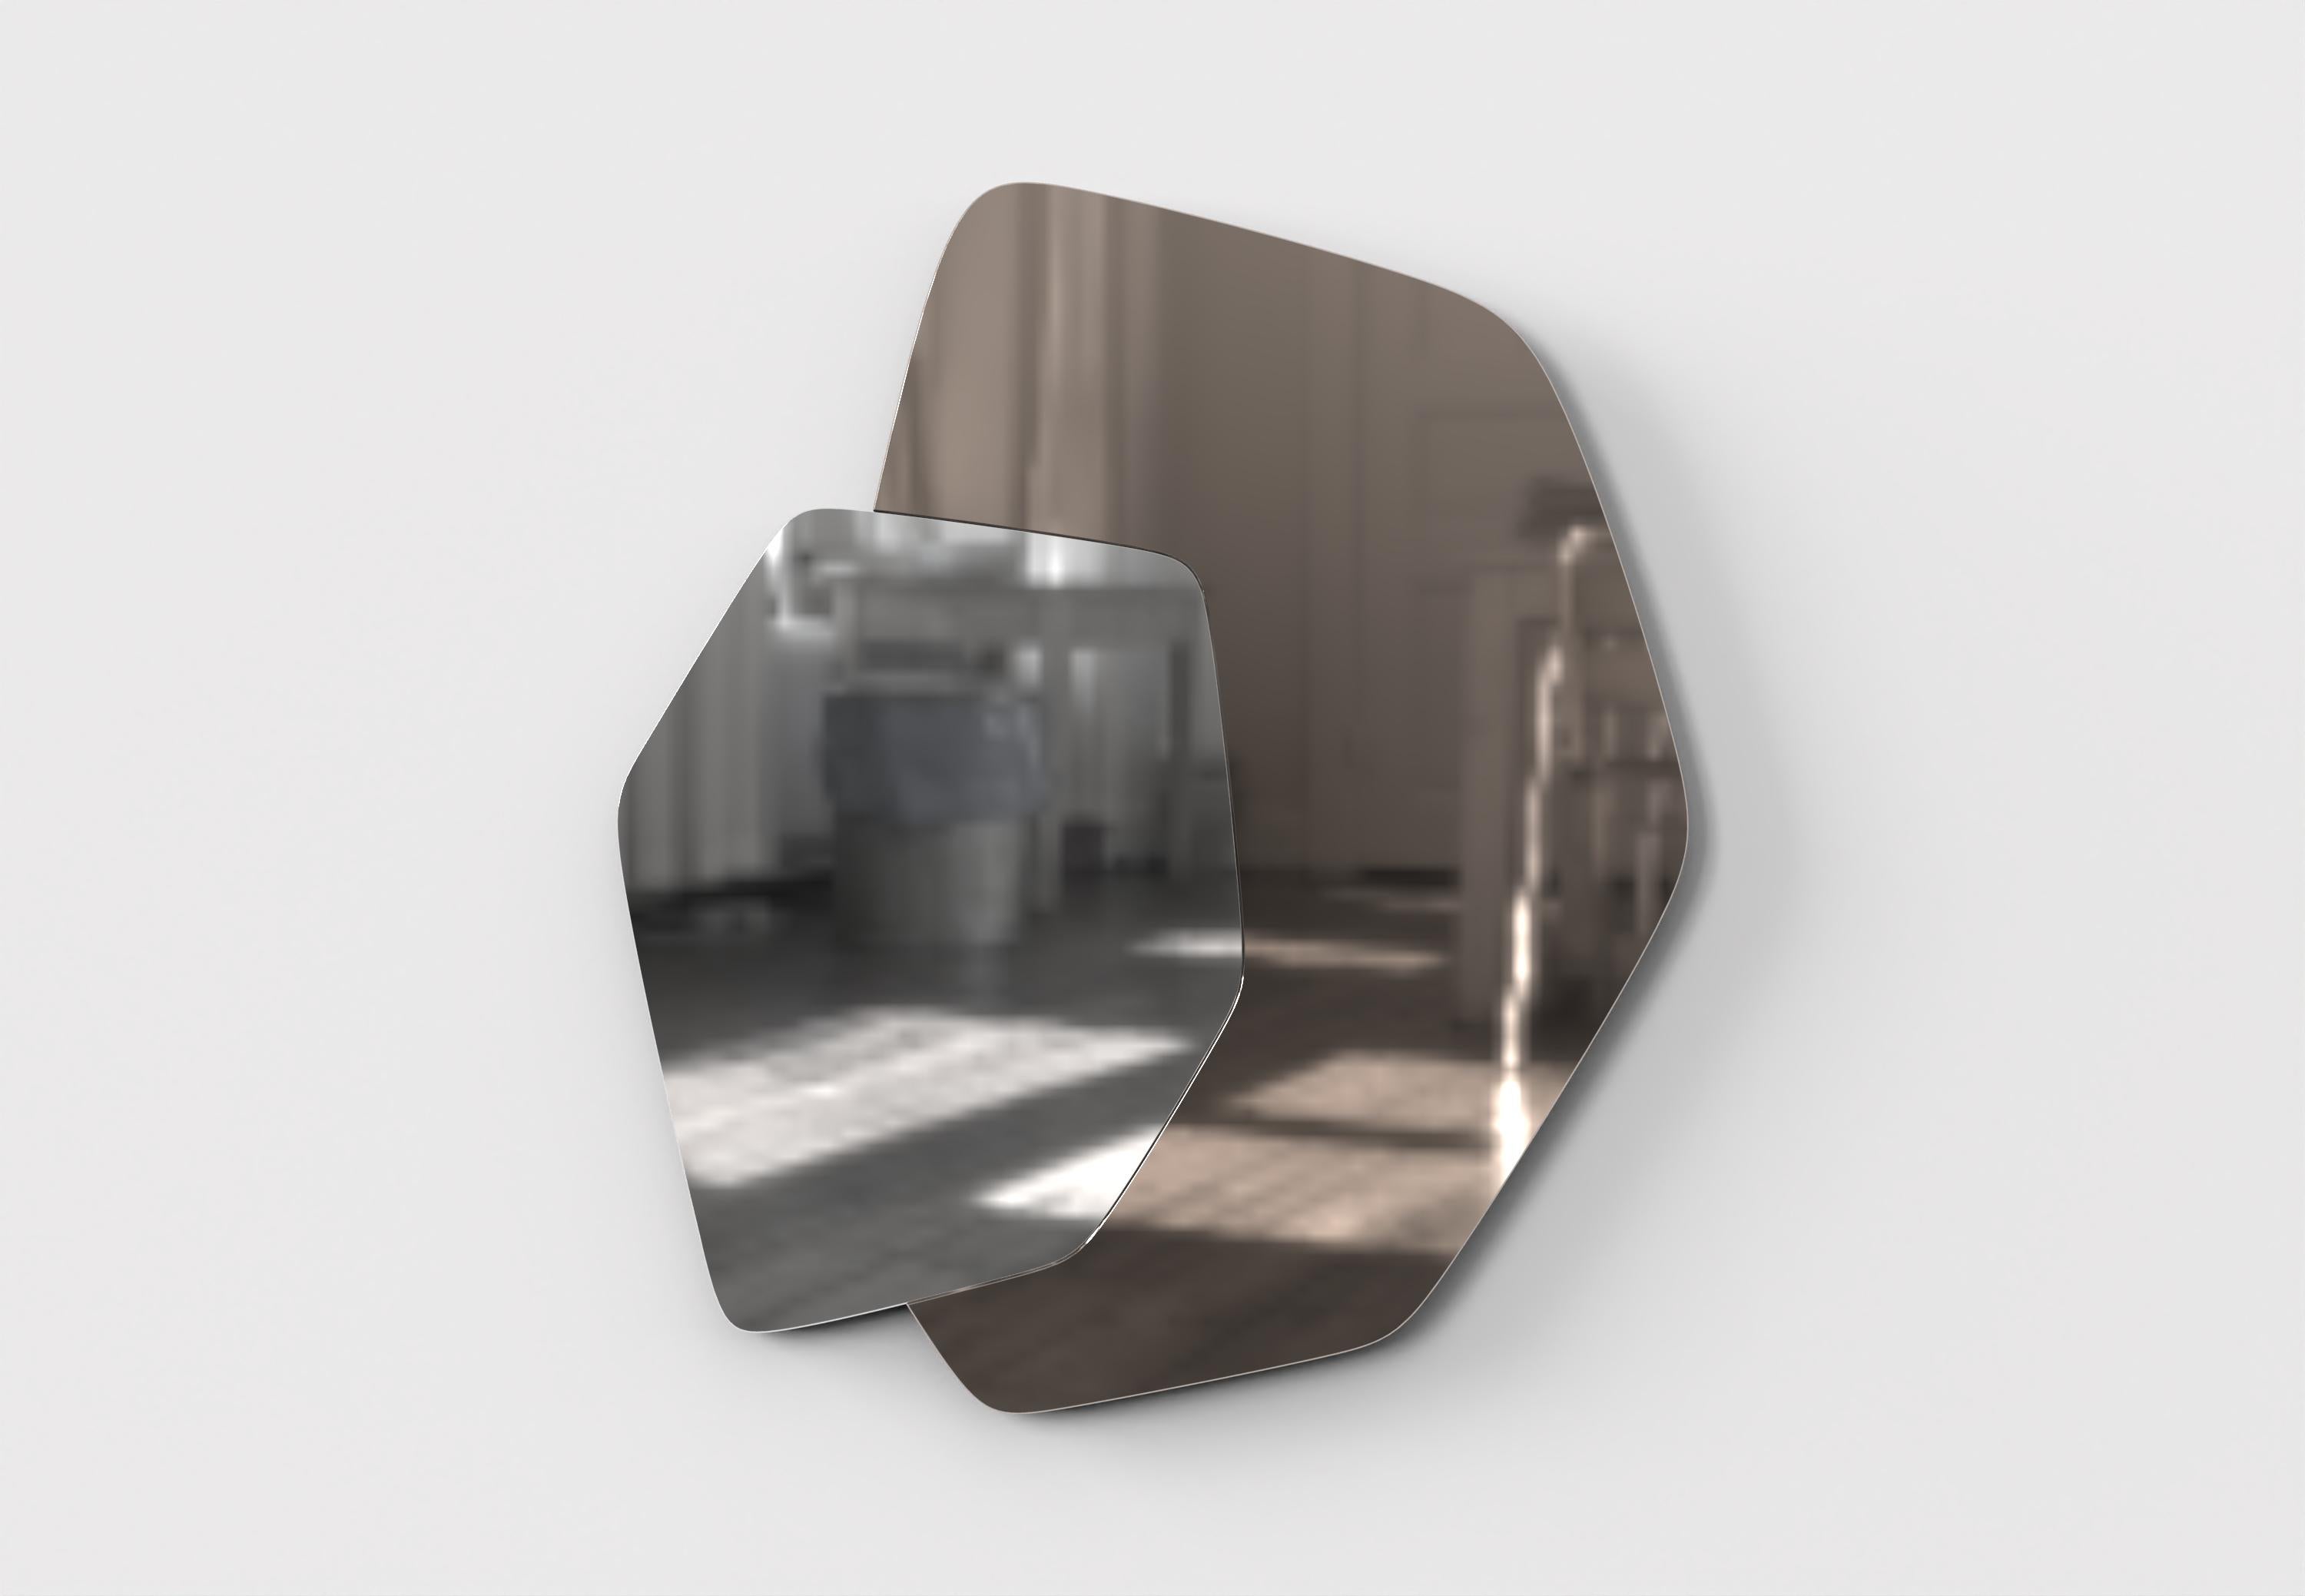 Nori V1 is a 21st Century mirror made by Italian artisans in different shades and colors. The piece is manufactured in a limited edition of 1000 signed and progressively numbered examples. It is part of the collectible design language Nori that has